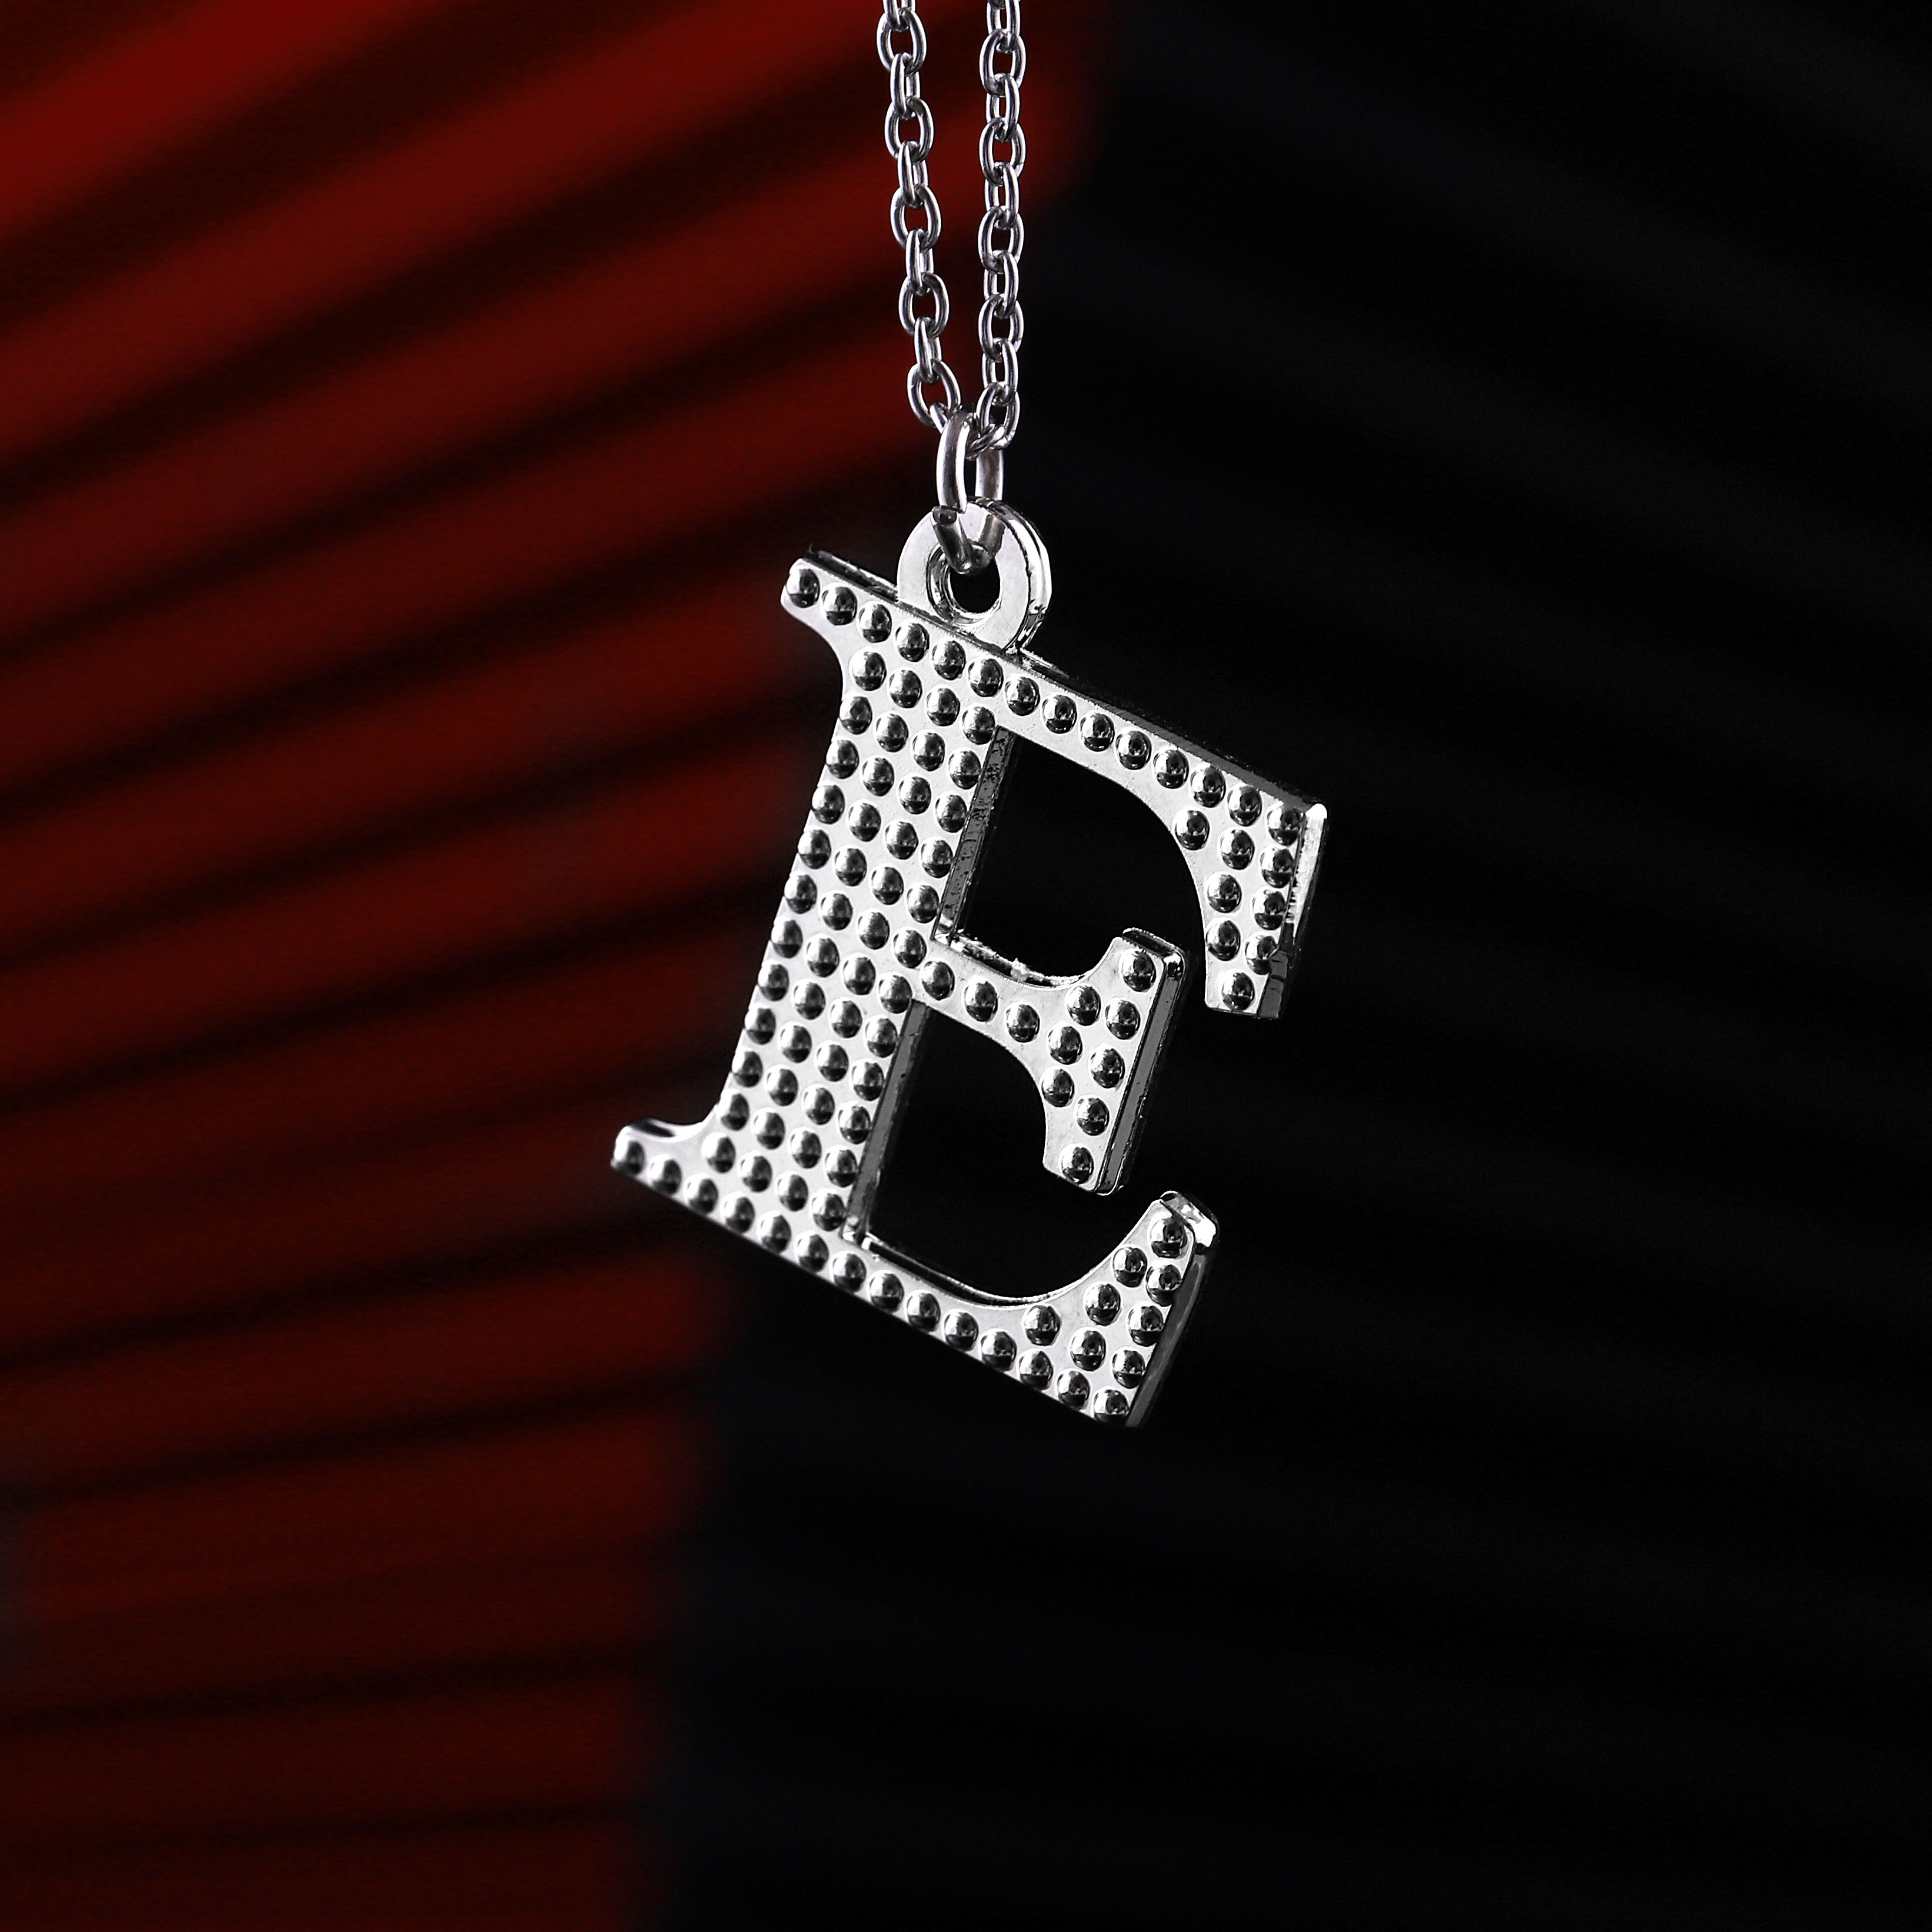 Custom Metal Alloy Siver Letter Necklace for Clothing